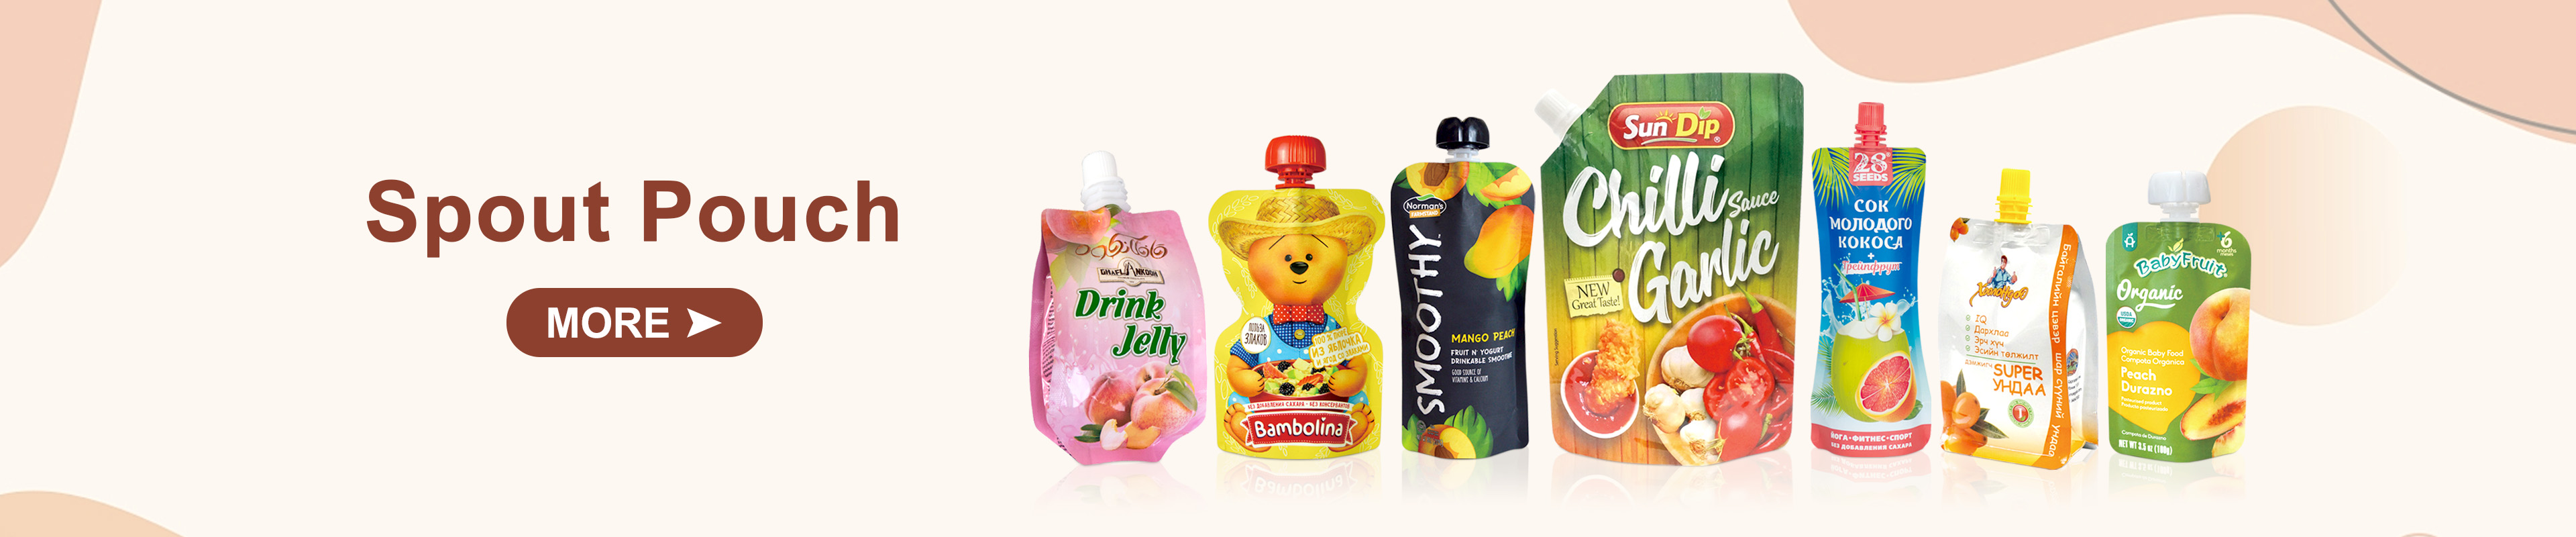 How to choose flexible packaging materials